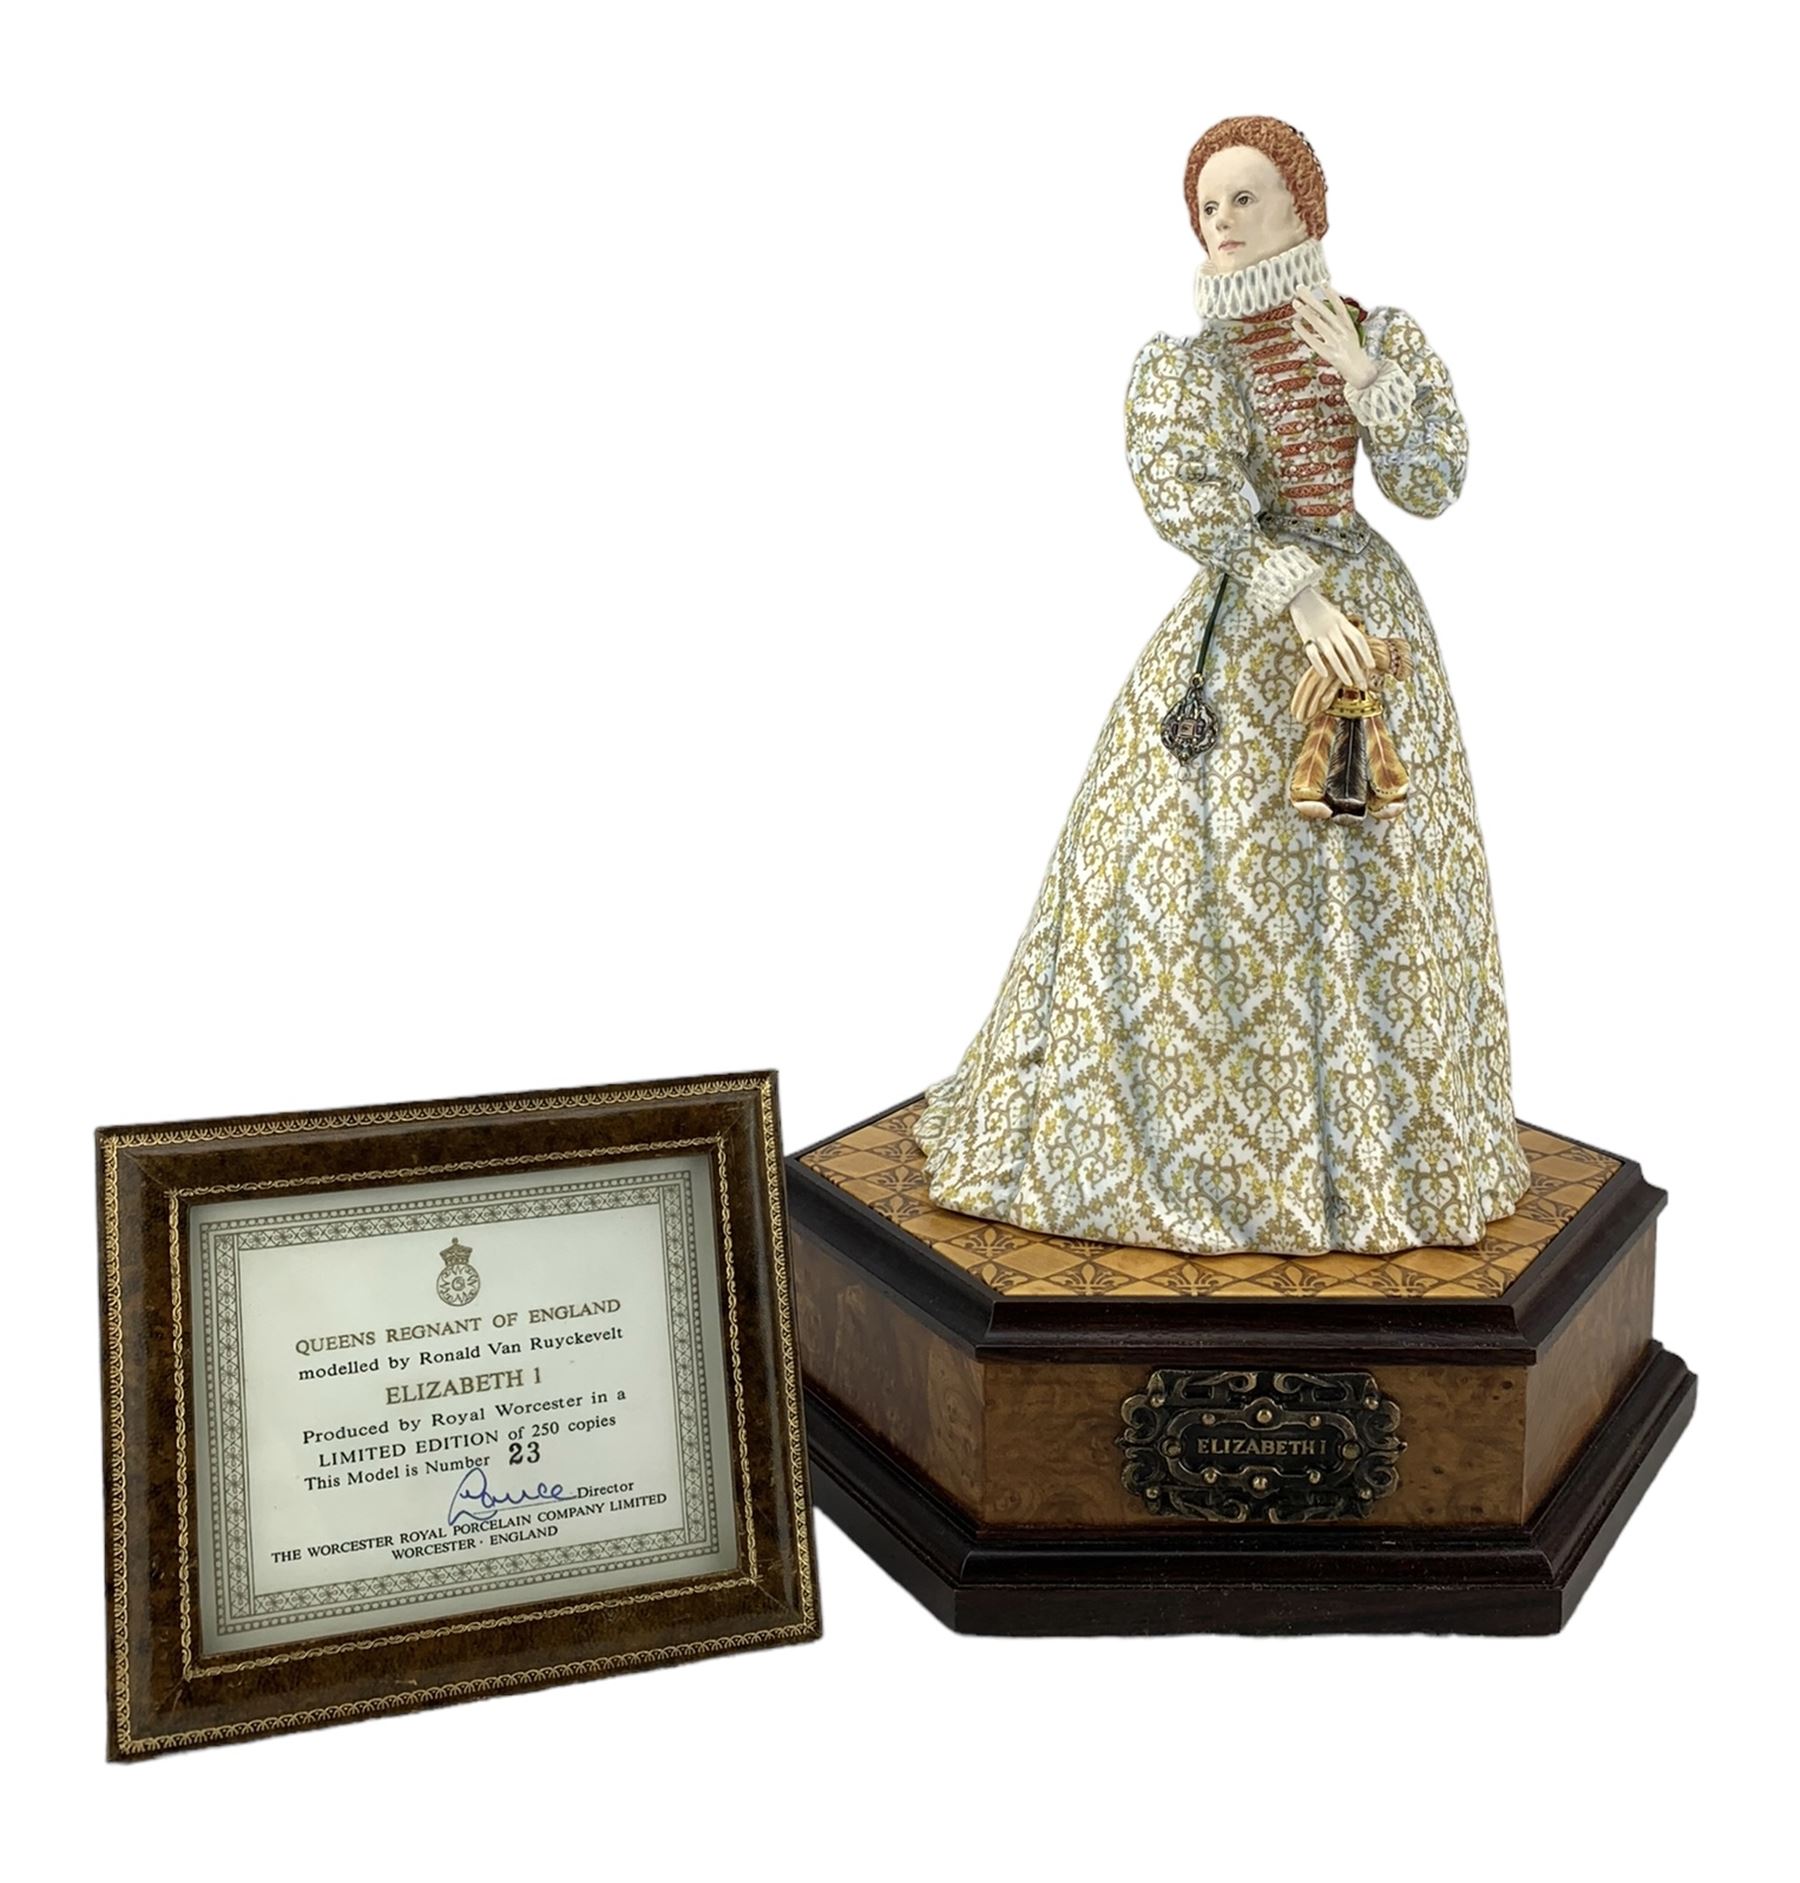 Royal Worcester limited edition figure Queen Elizabeth 1 from the Queens Regnant of England series m